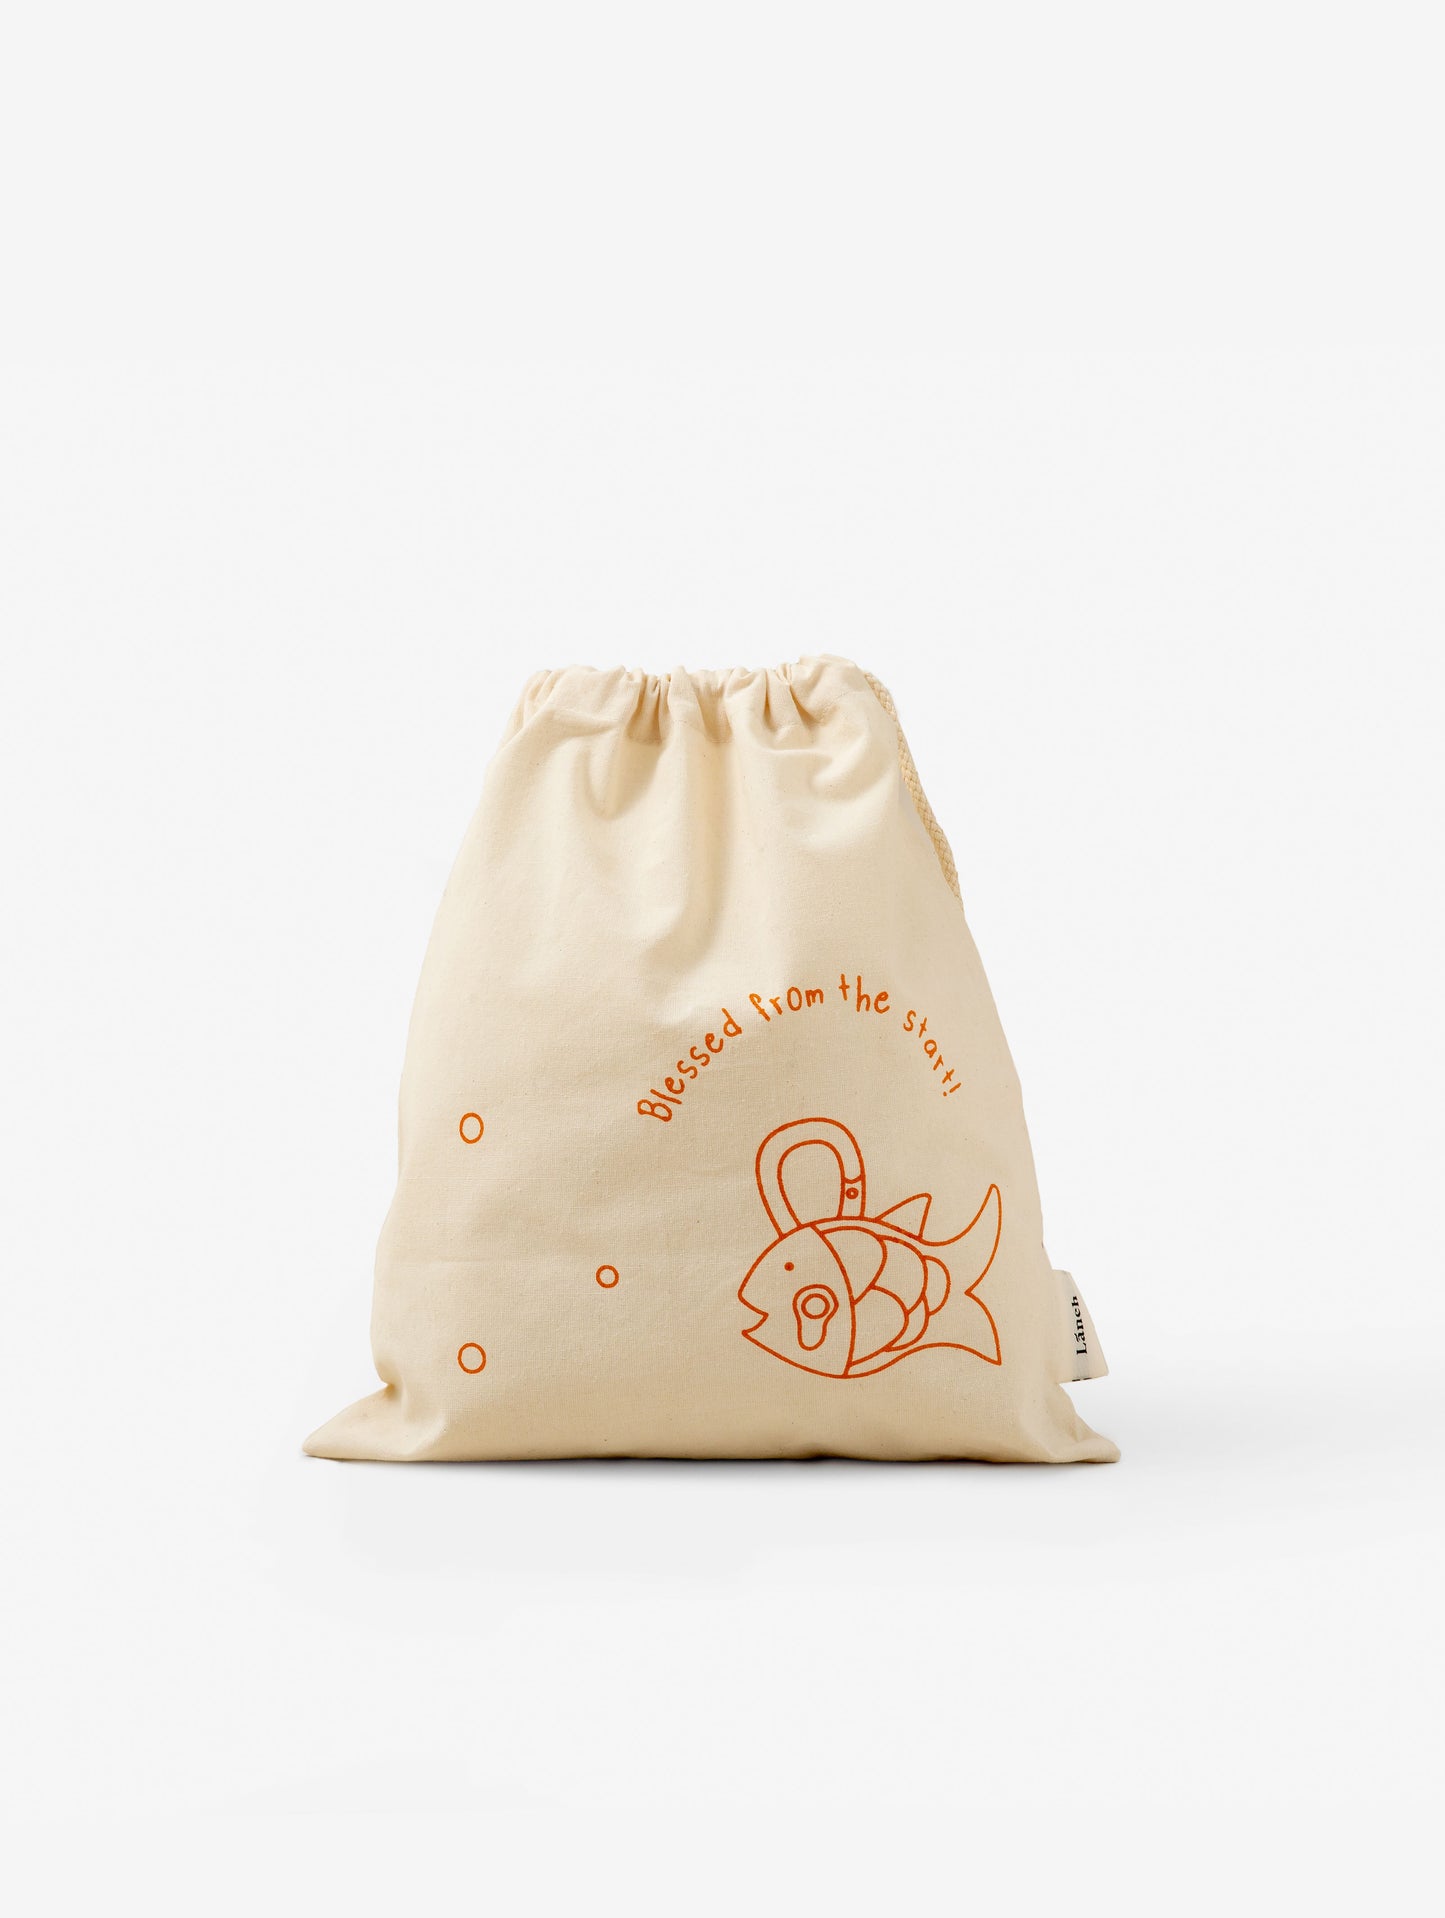 A white string bag with orange fish drawing